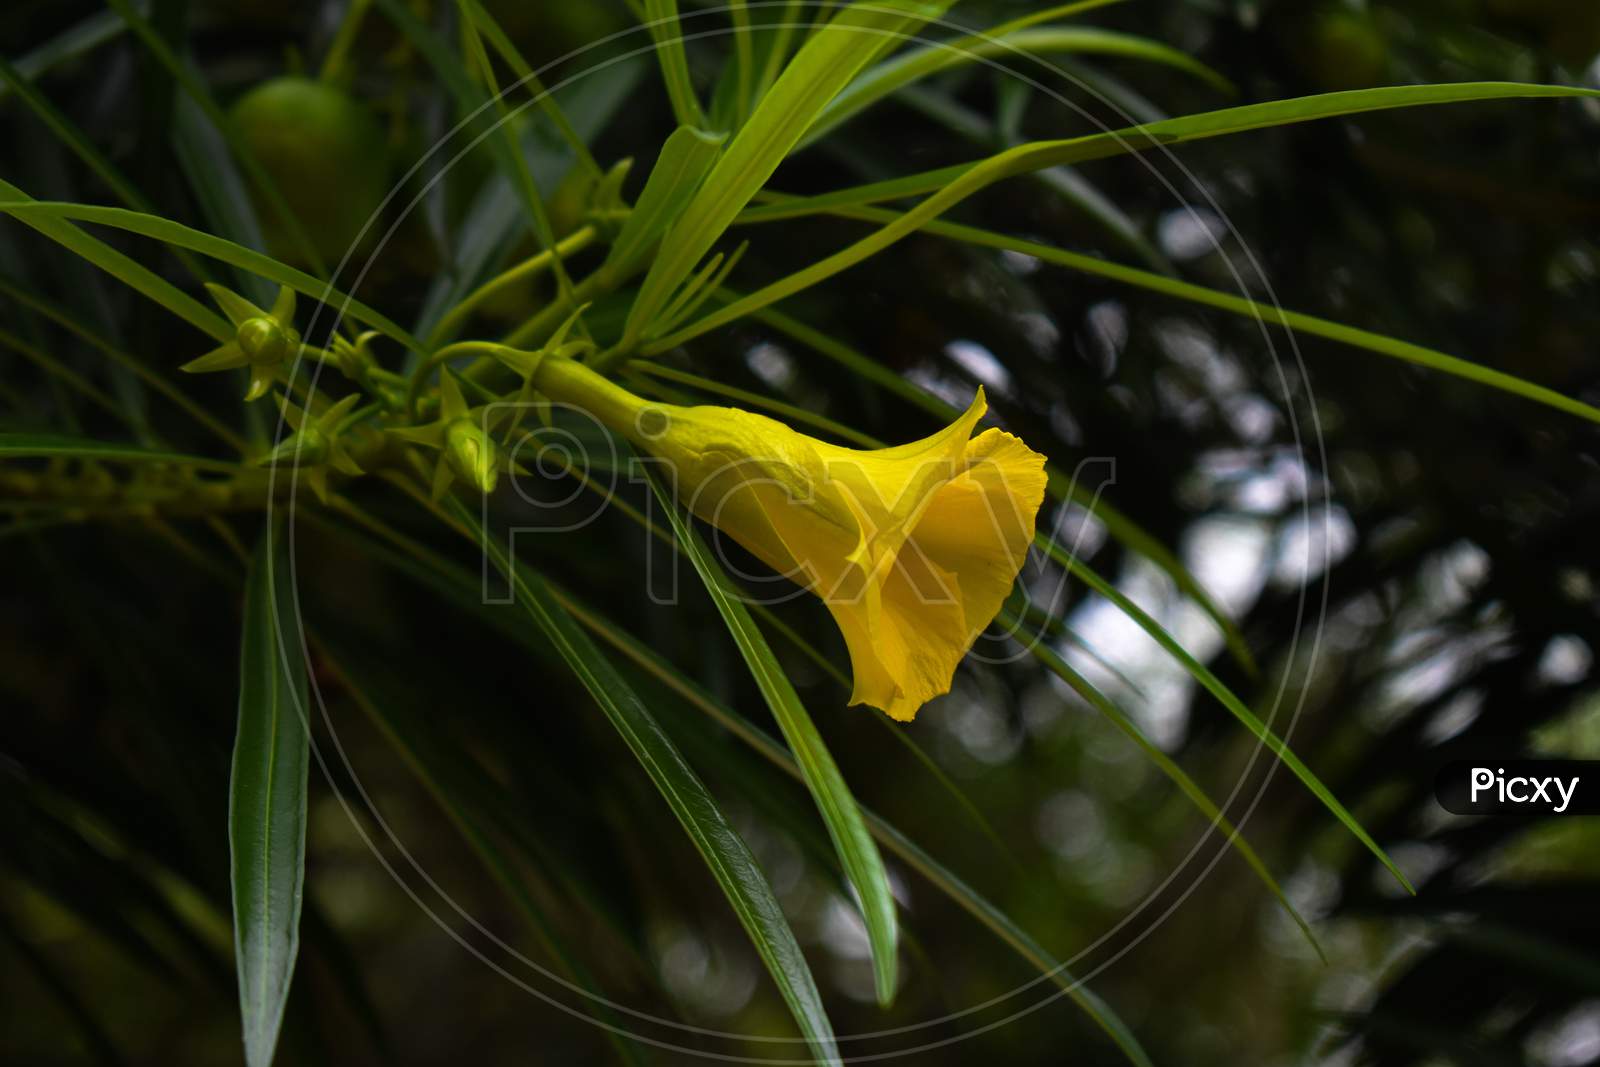 Cascabela Thevetia Or Yellow Oleander Flower In Focus With Green Leaves Surrounding